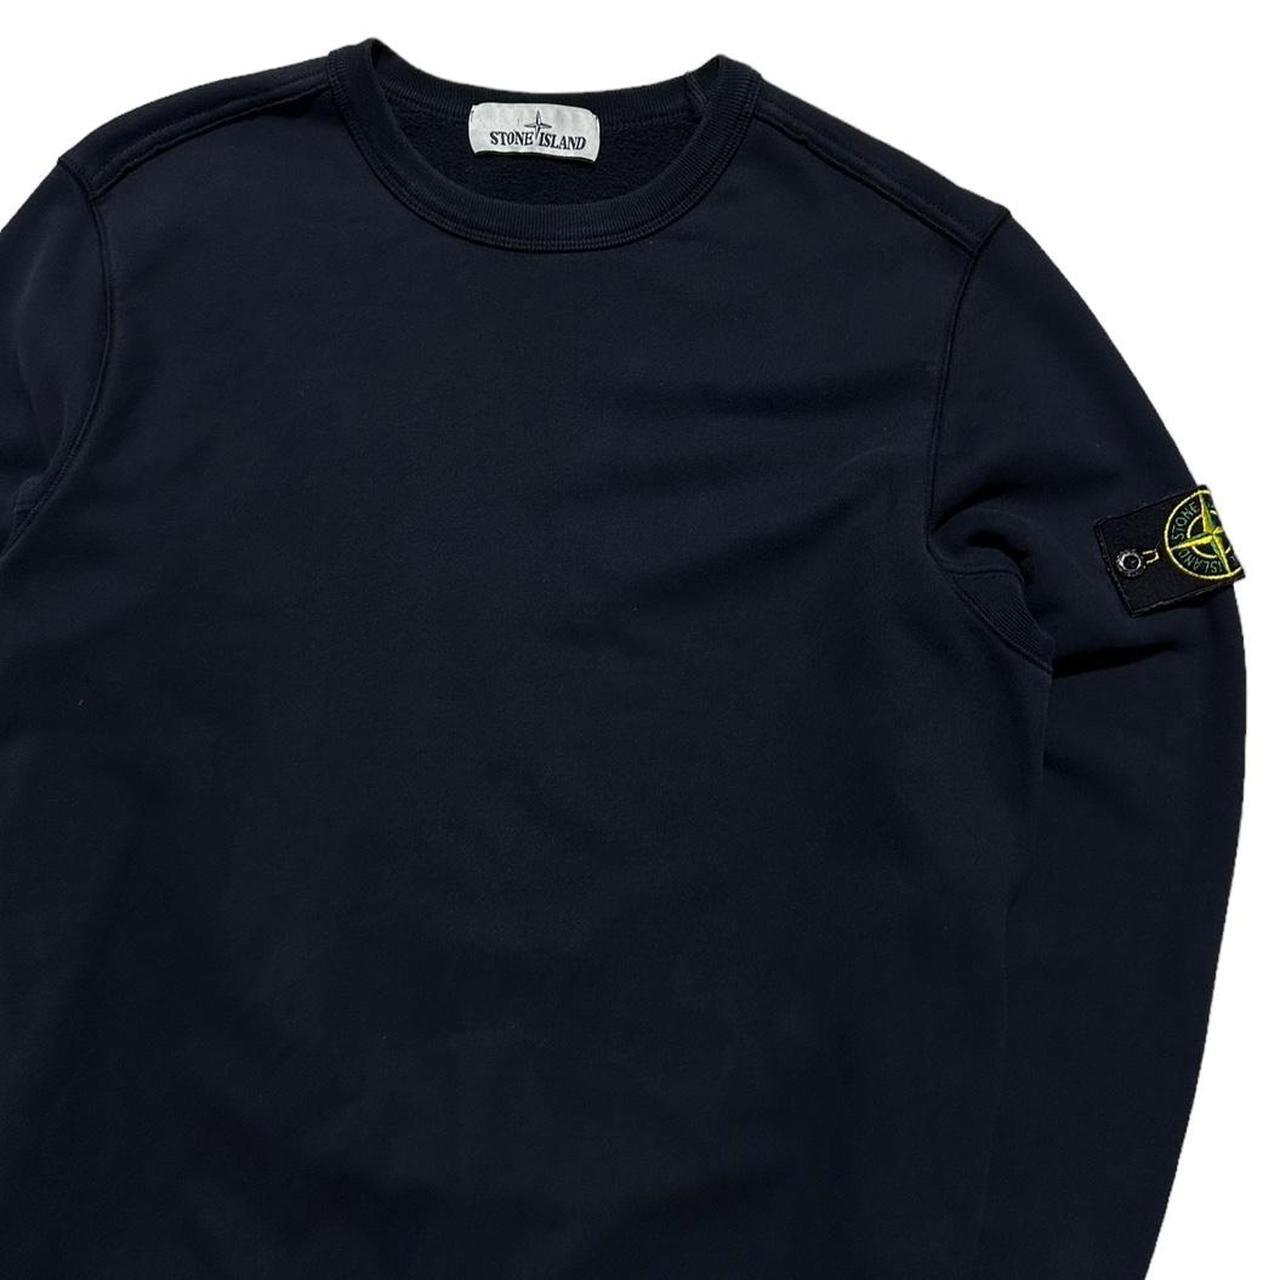 Stone Island Navy Pullover Crewneck - Known Source